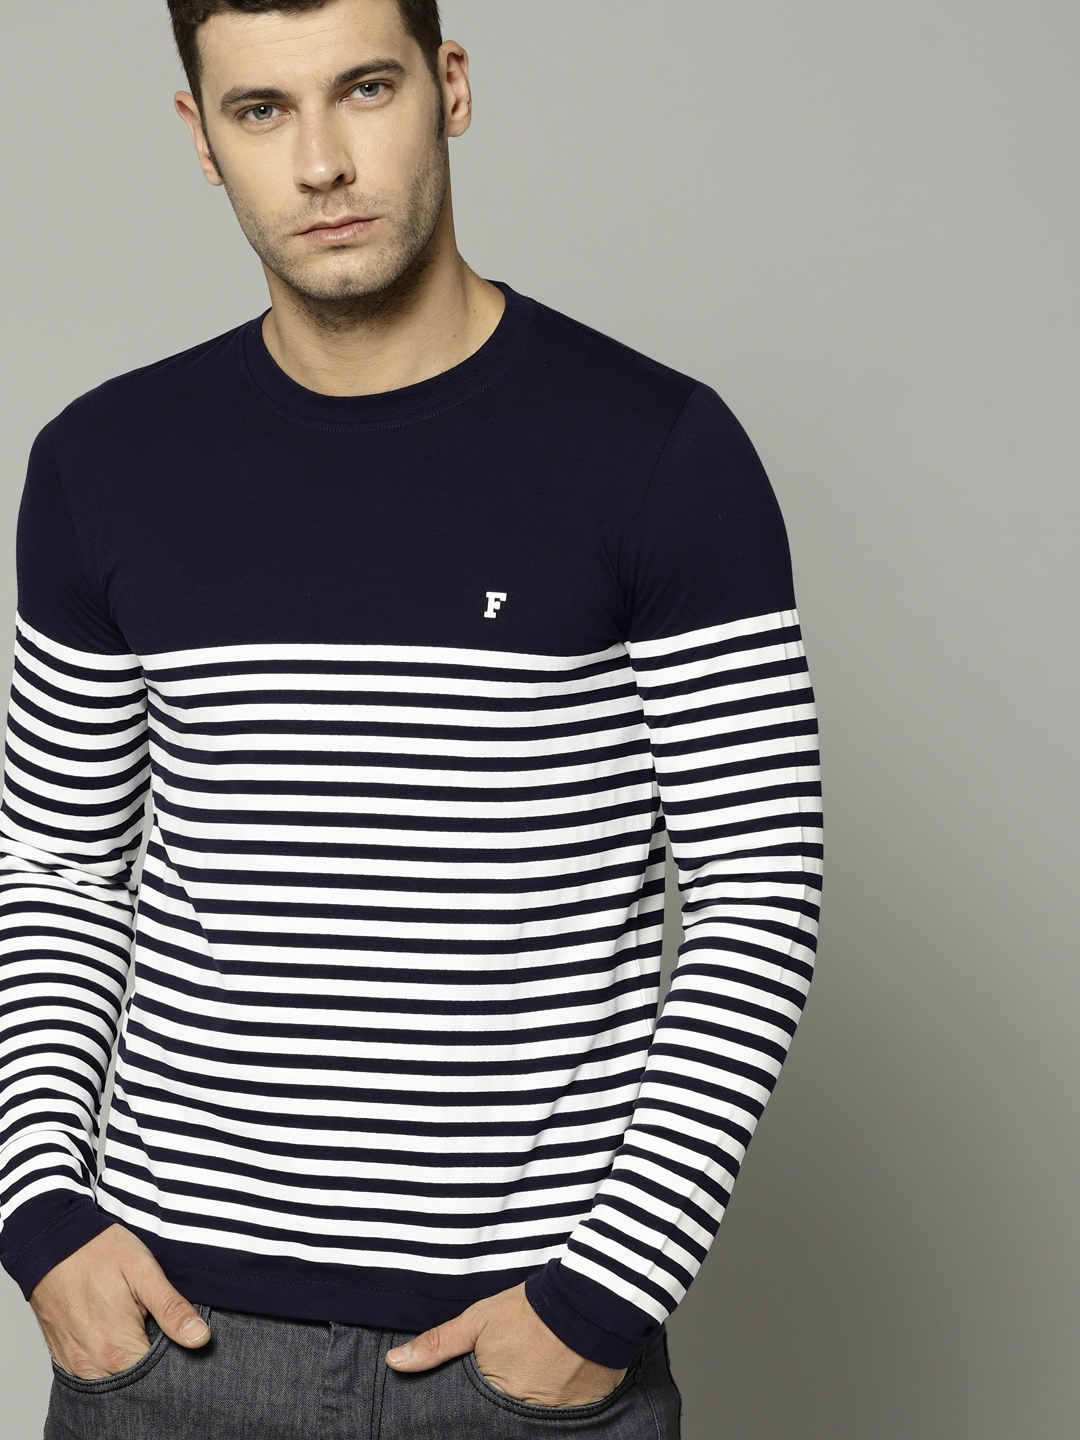 French Connection Mens Long Sleeve Stripe Crew Neck T-Shirt